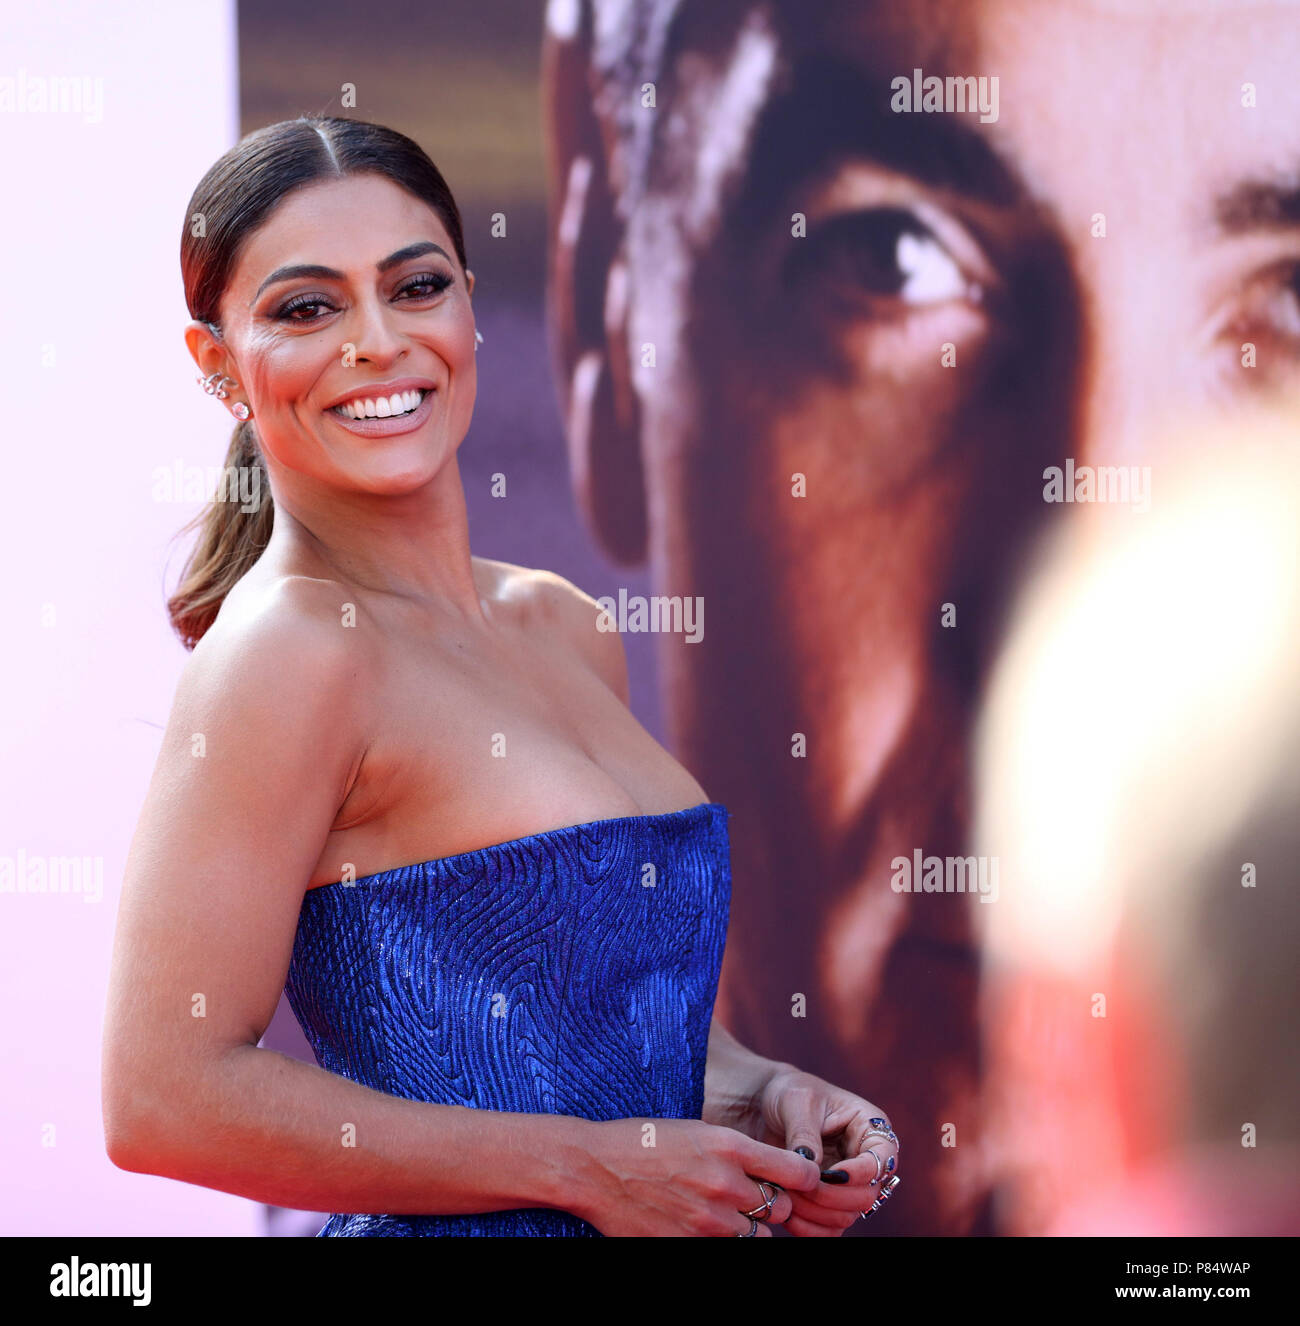 Celebrities attend 46th AFI Life Achievement Award Gala Tribute honoring George Clooney at Dolby Theatre.  Featuring: Juliana Paes Where: Los Angeles, California, United States When: 07 Jun 2018 Credit: Brian To/WENN.com Stock Photo